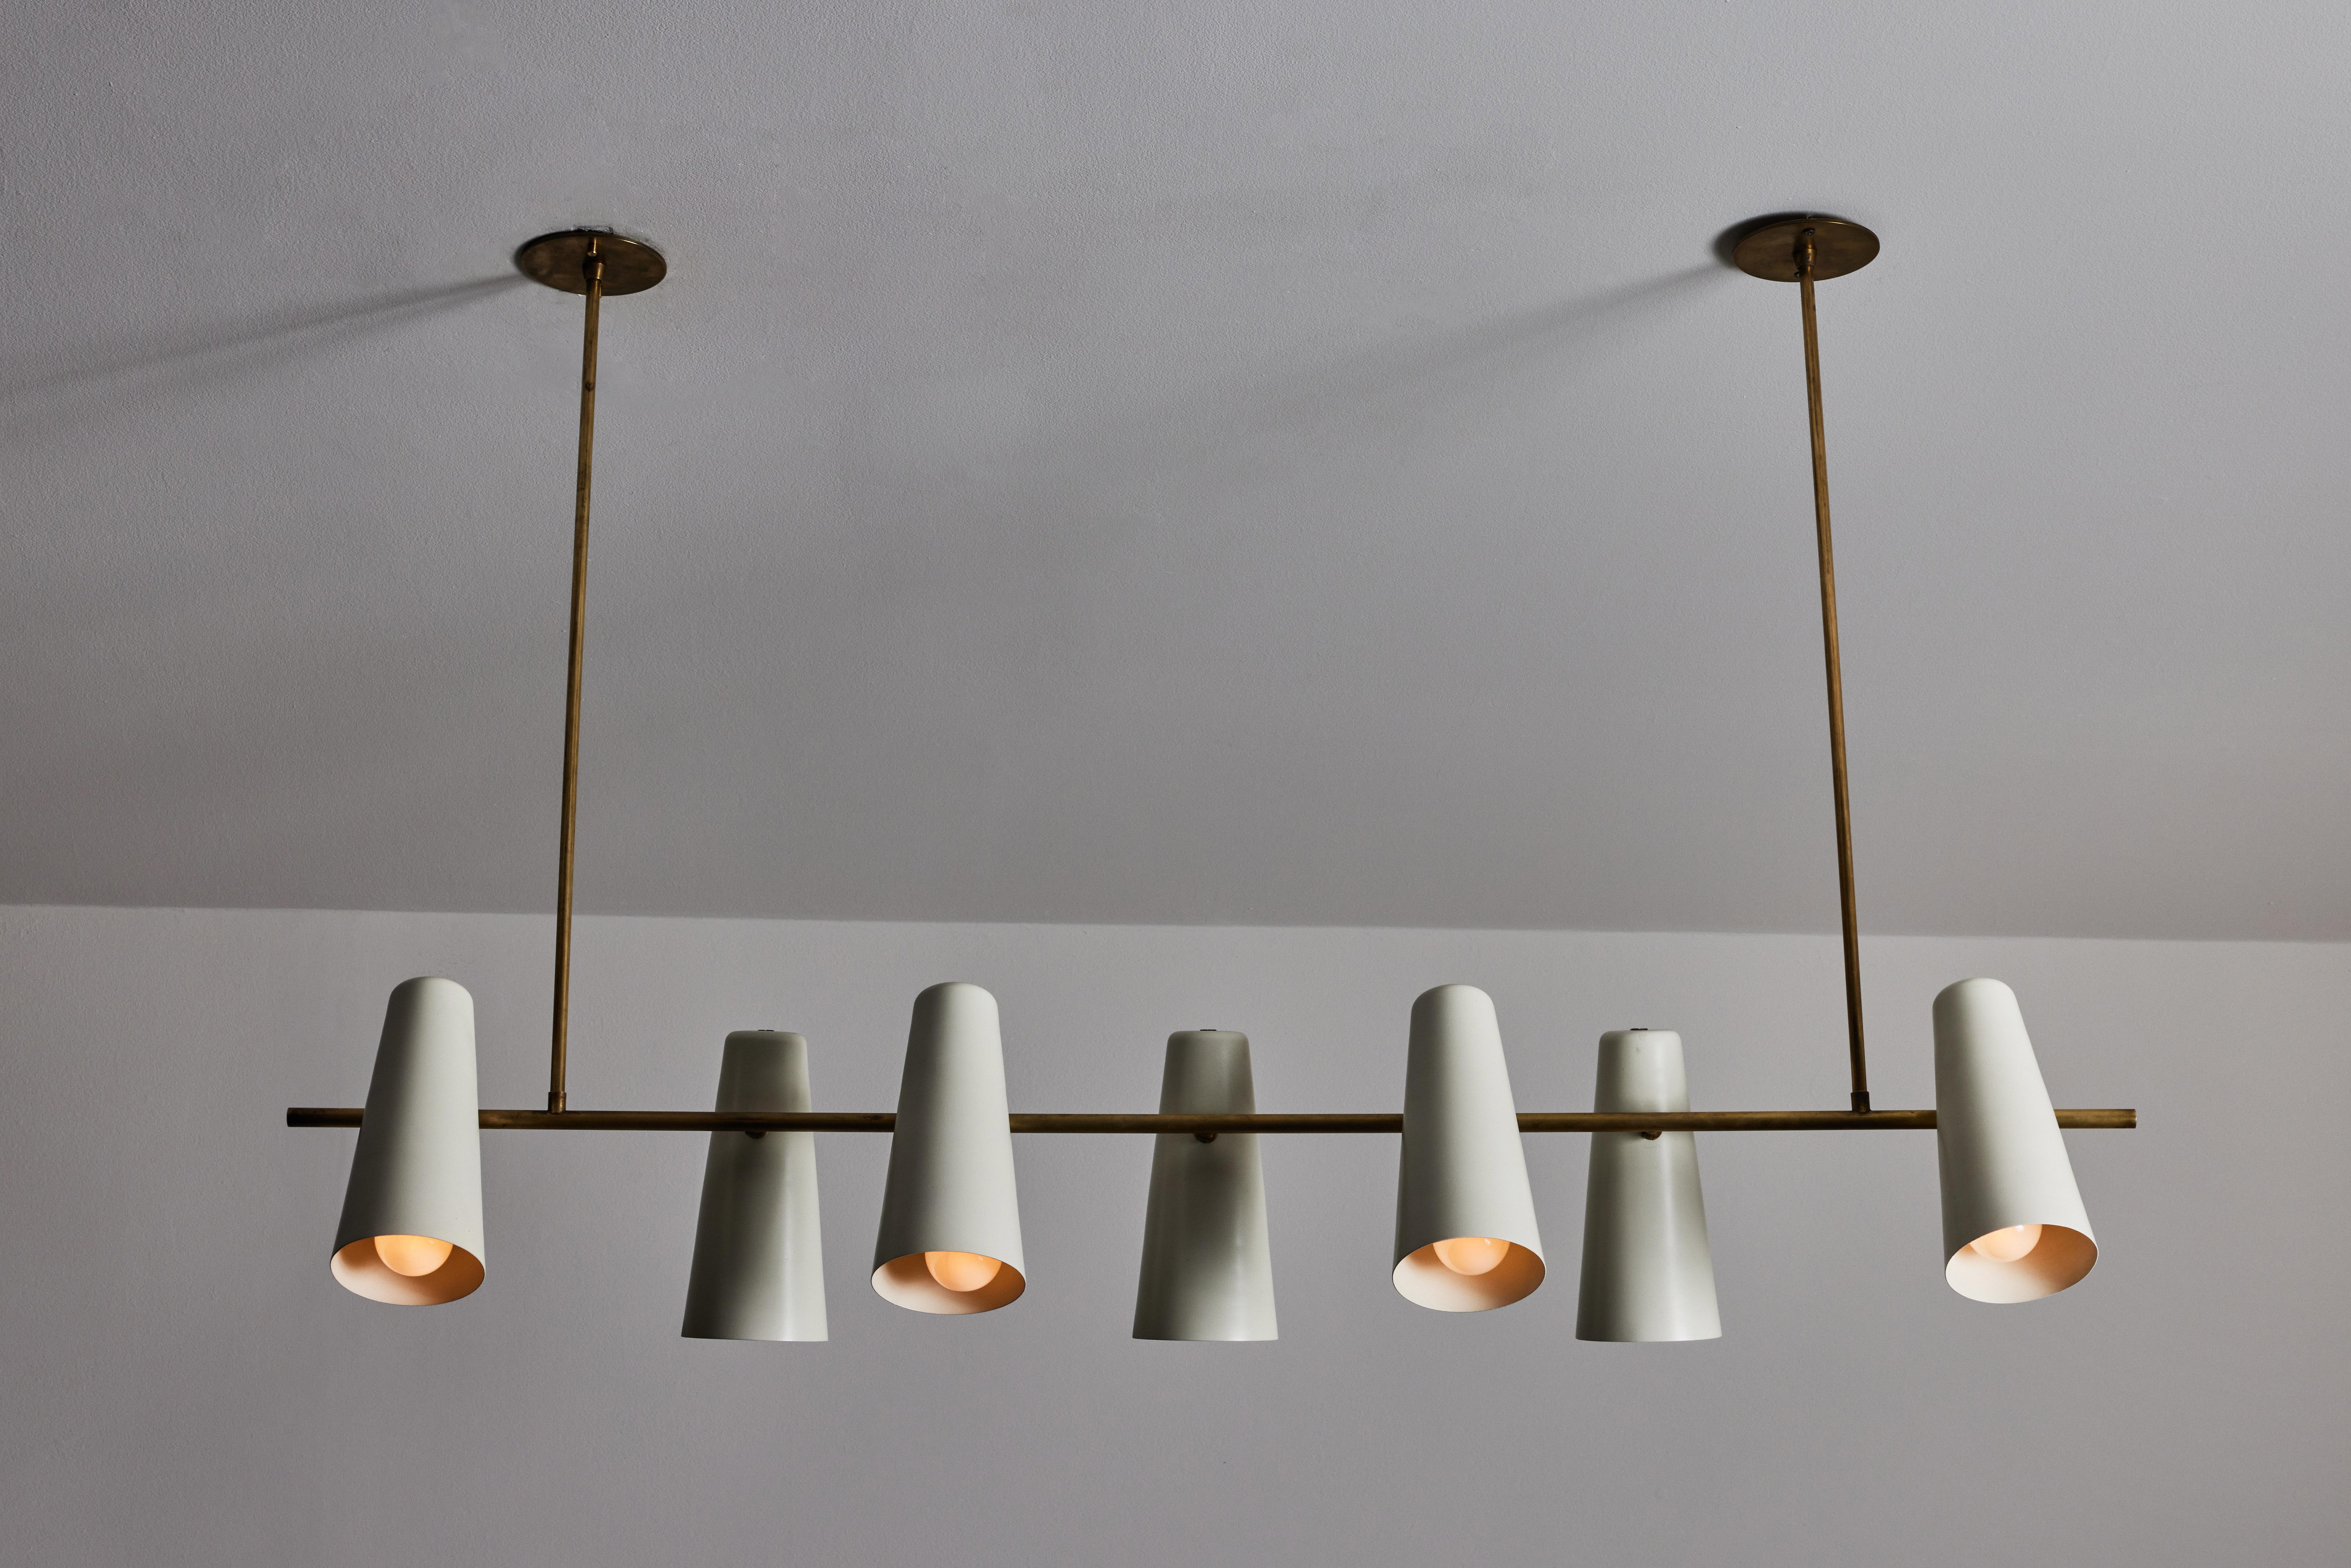 Seven shade Italian suspension light. Manufactured in Italy, circa 1950s. Enameled aluminum, brass, custom brass ceiling plates. Rewired for U.S. standards. Shades adjust up/down. We recommend seven E26 25w maximum bulbs. Bulbs provided as a one